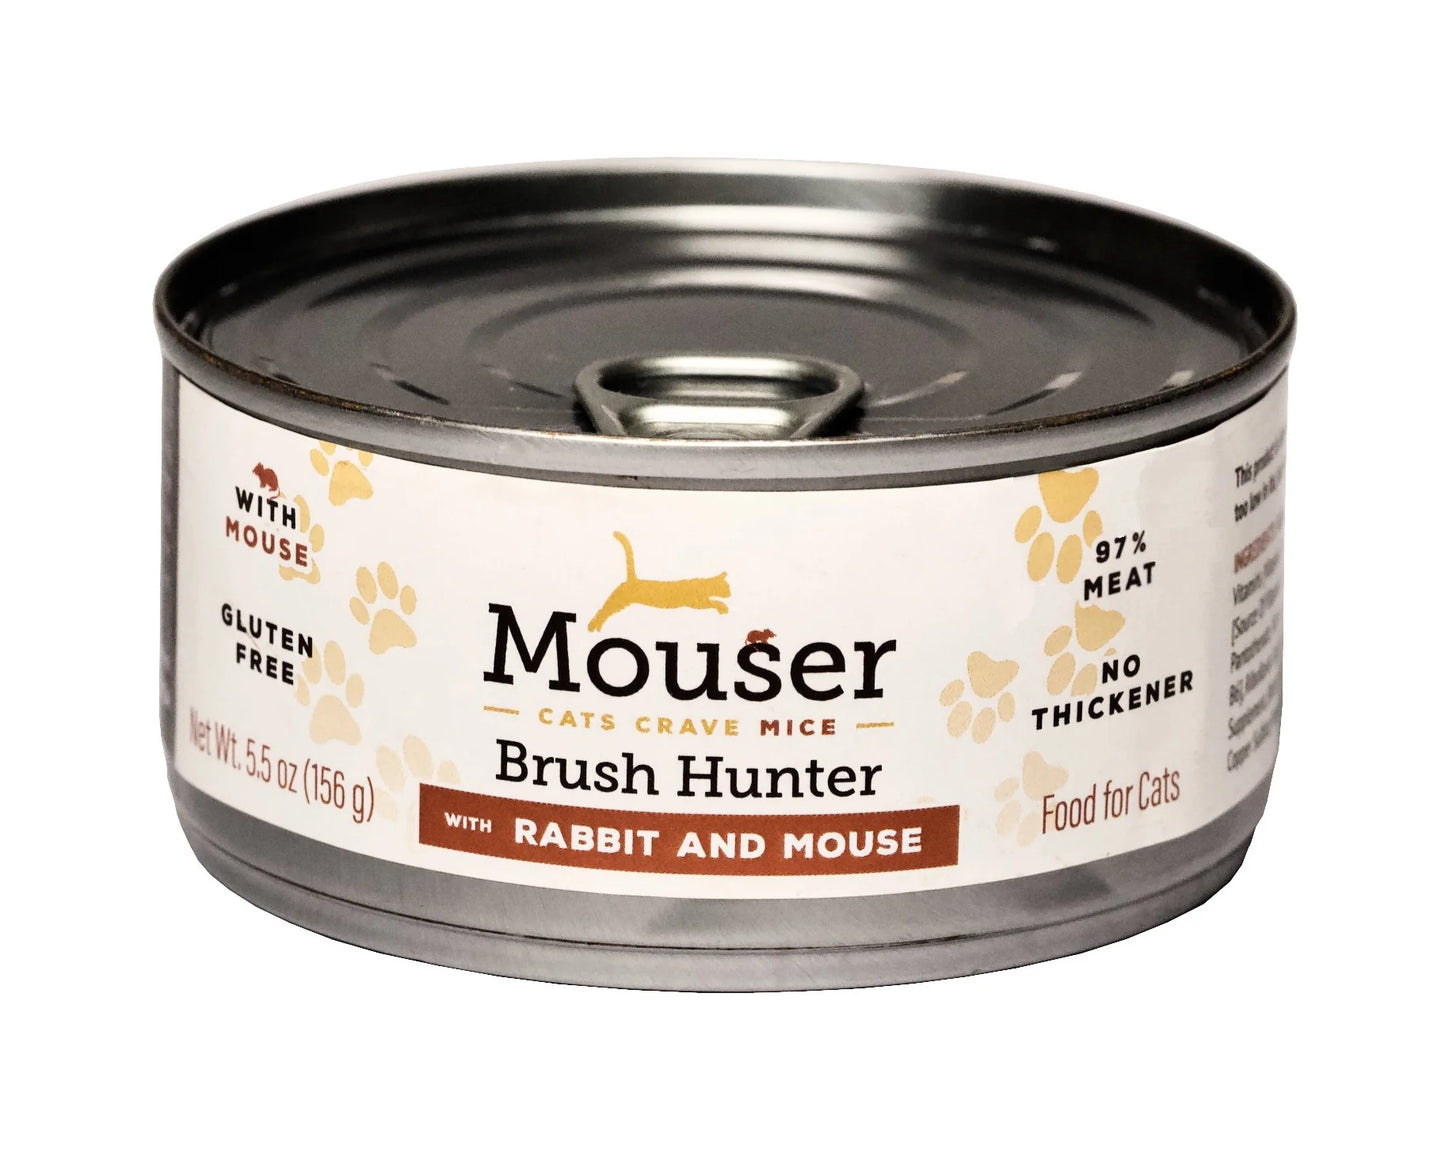 Mouser Brush Hunter Rabbit With Mouse Recipe 5.5-oz, Wet Cat Food, Case Of 24